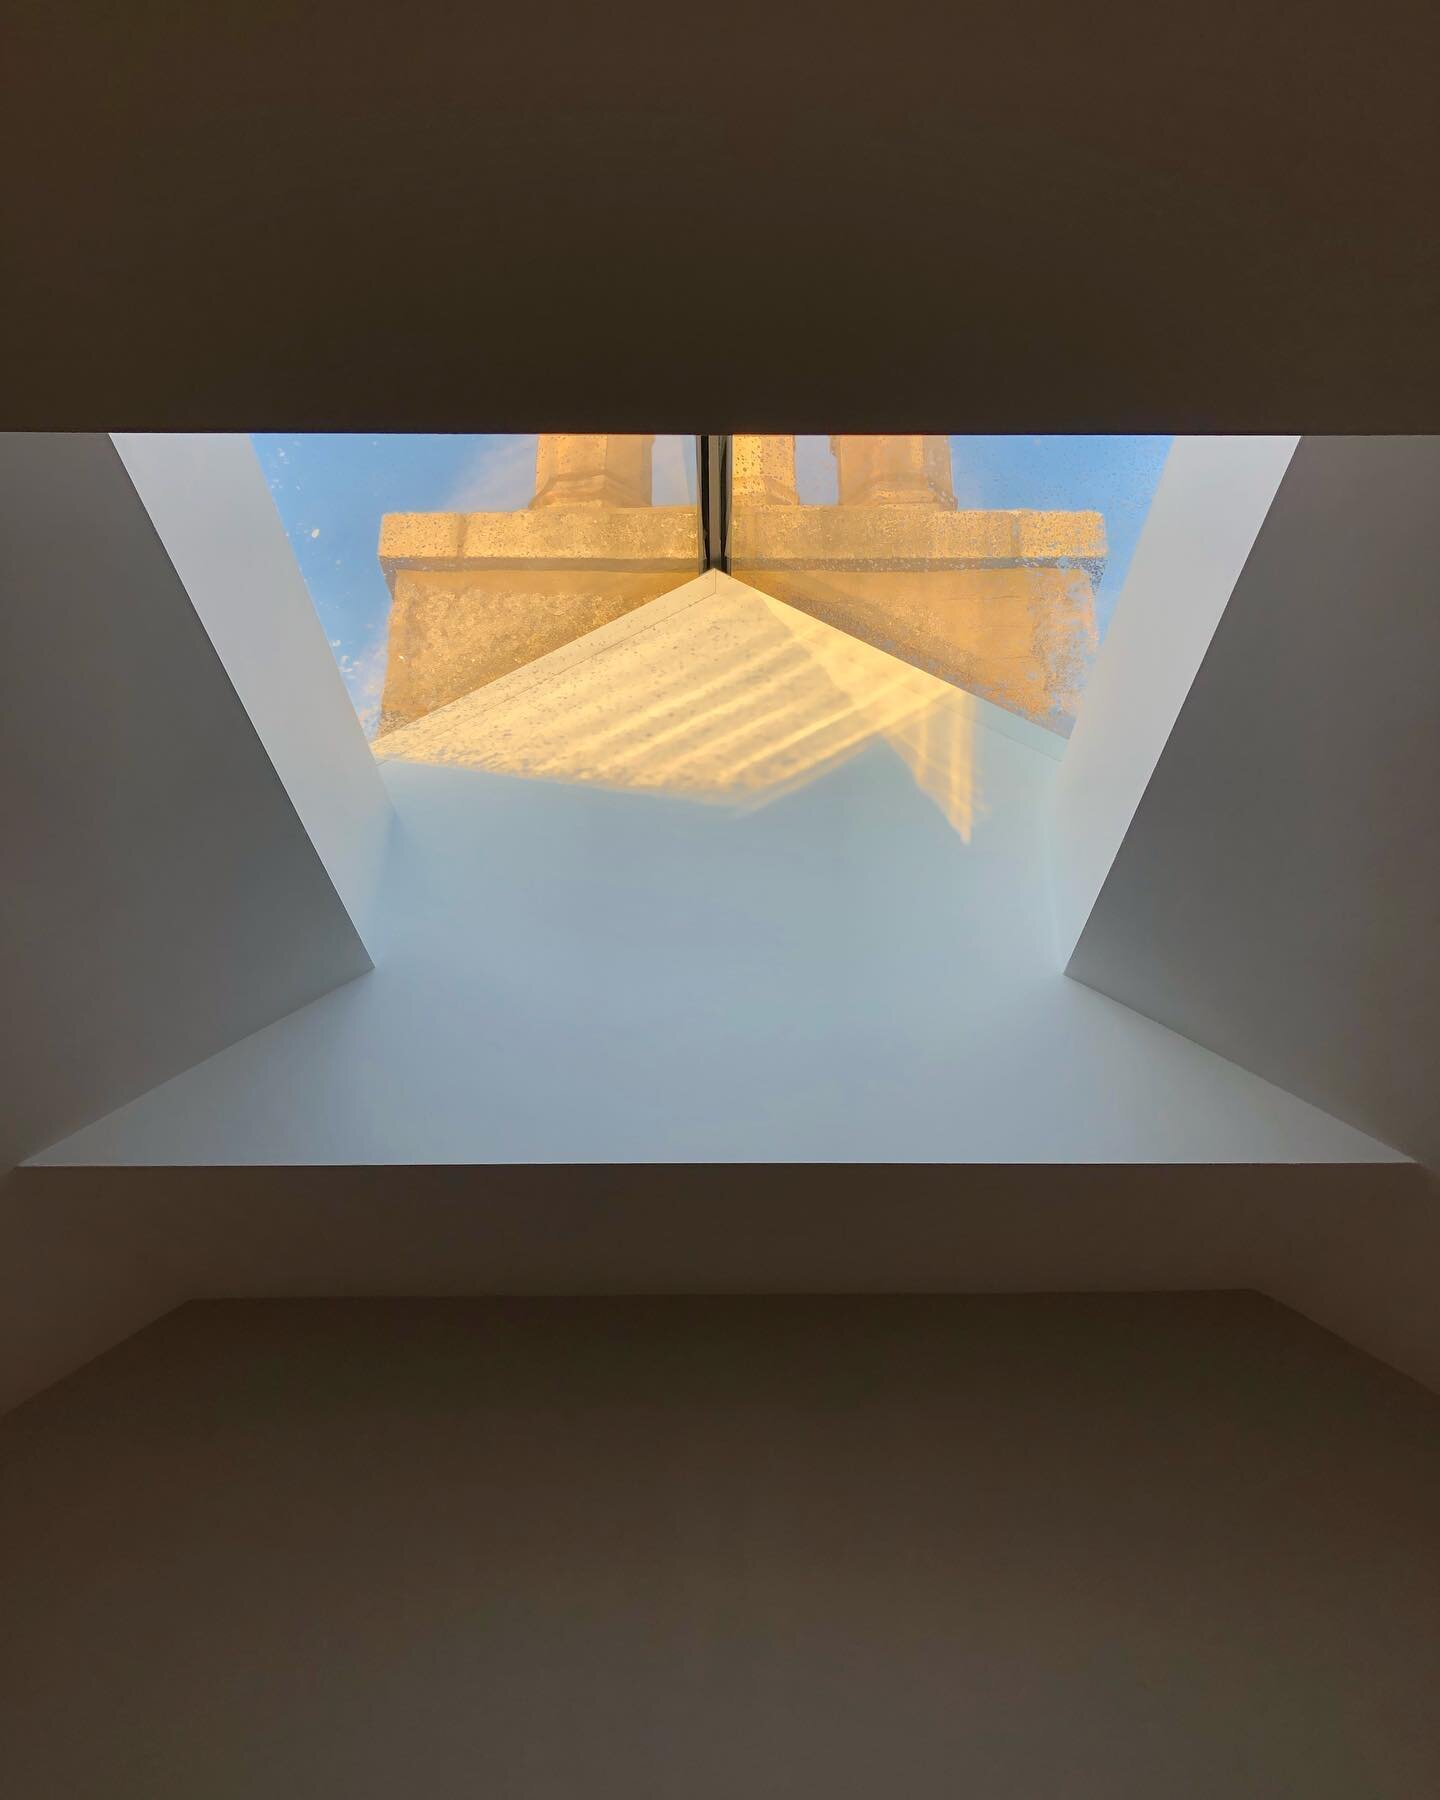 Frosty morning today on site in Aberdeen. View of the new roof light over the stairwell. 
.
.
.

#architect #architecture #designer #aberdeenshire #contemporarydesign #contemporaryhome #architecturelovers #fineinteriors #interiorinspiration #interior